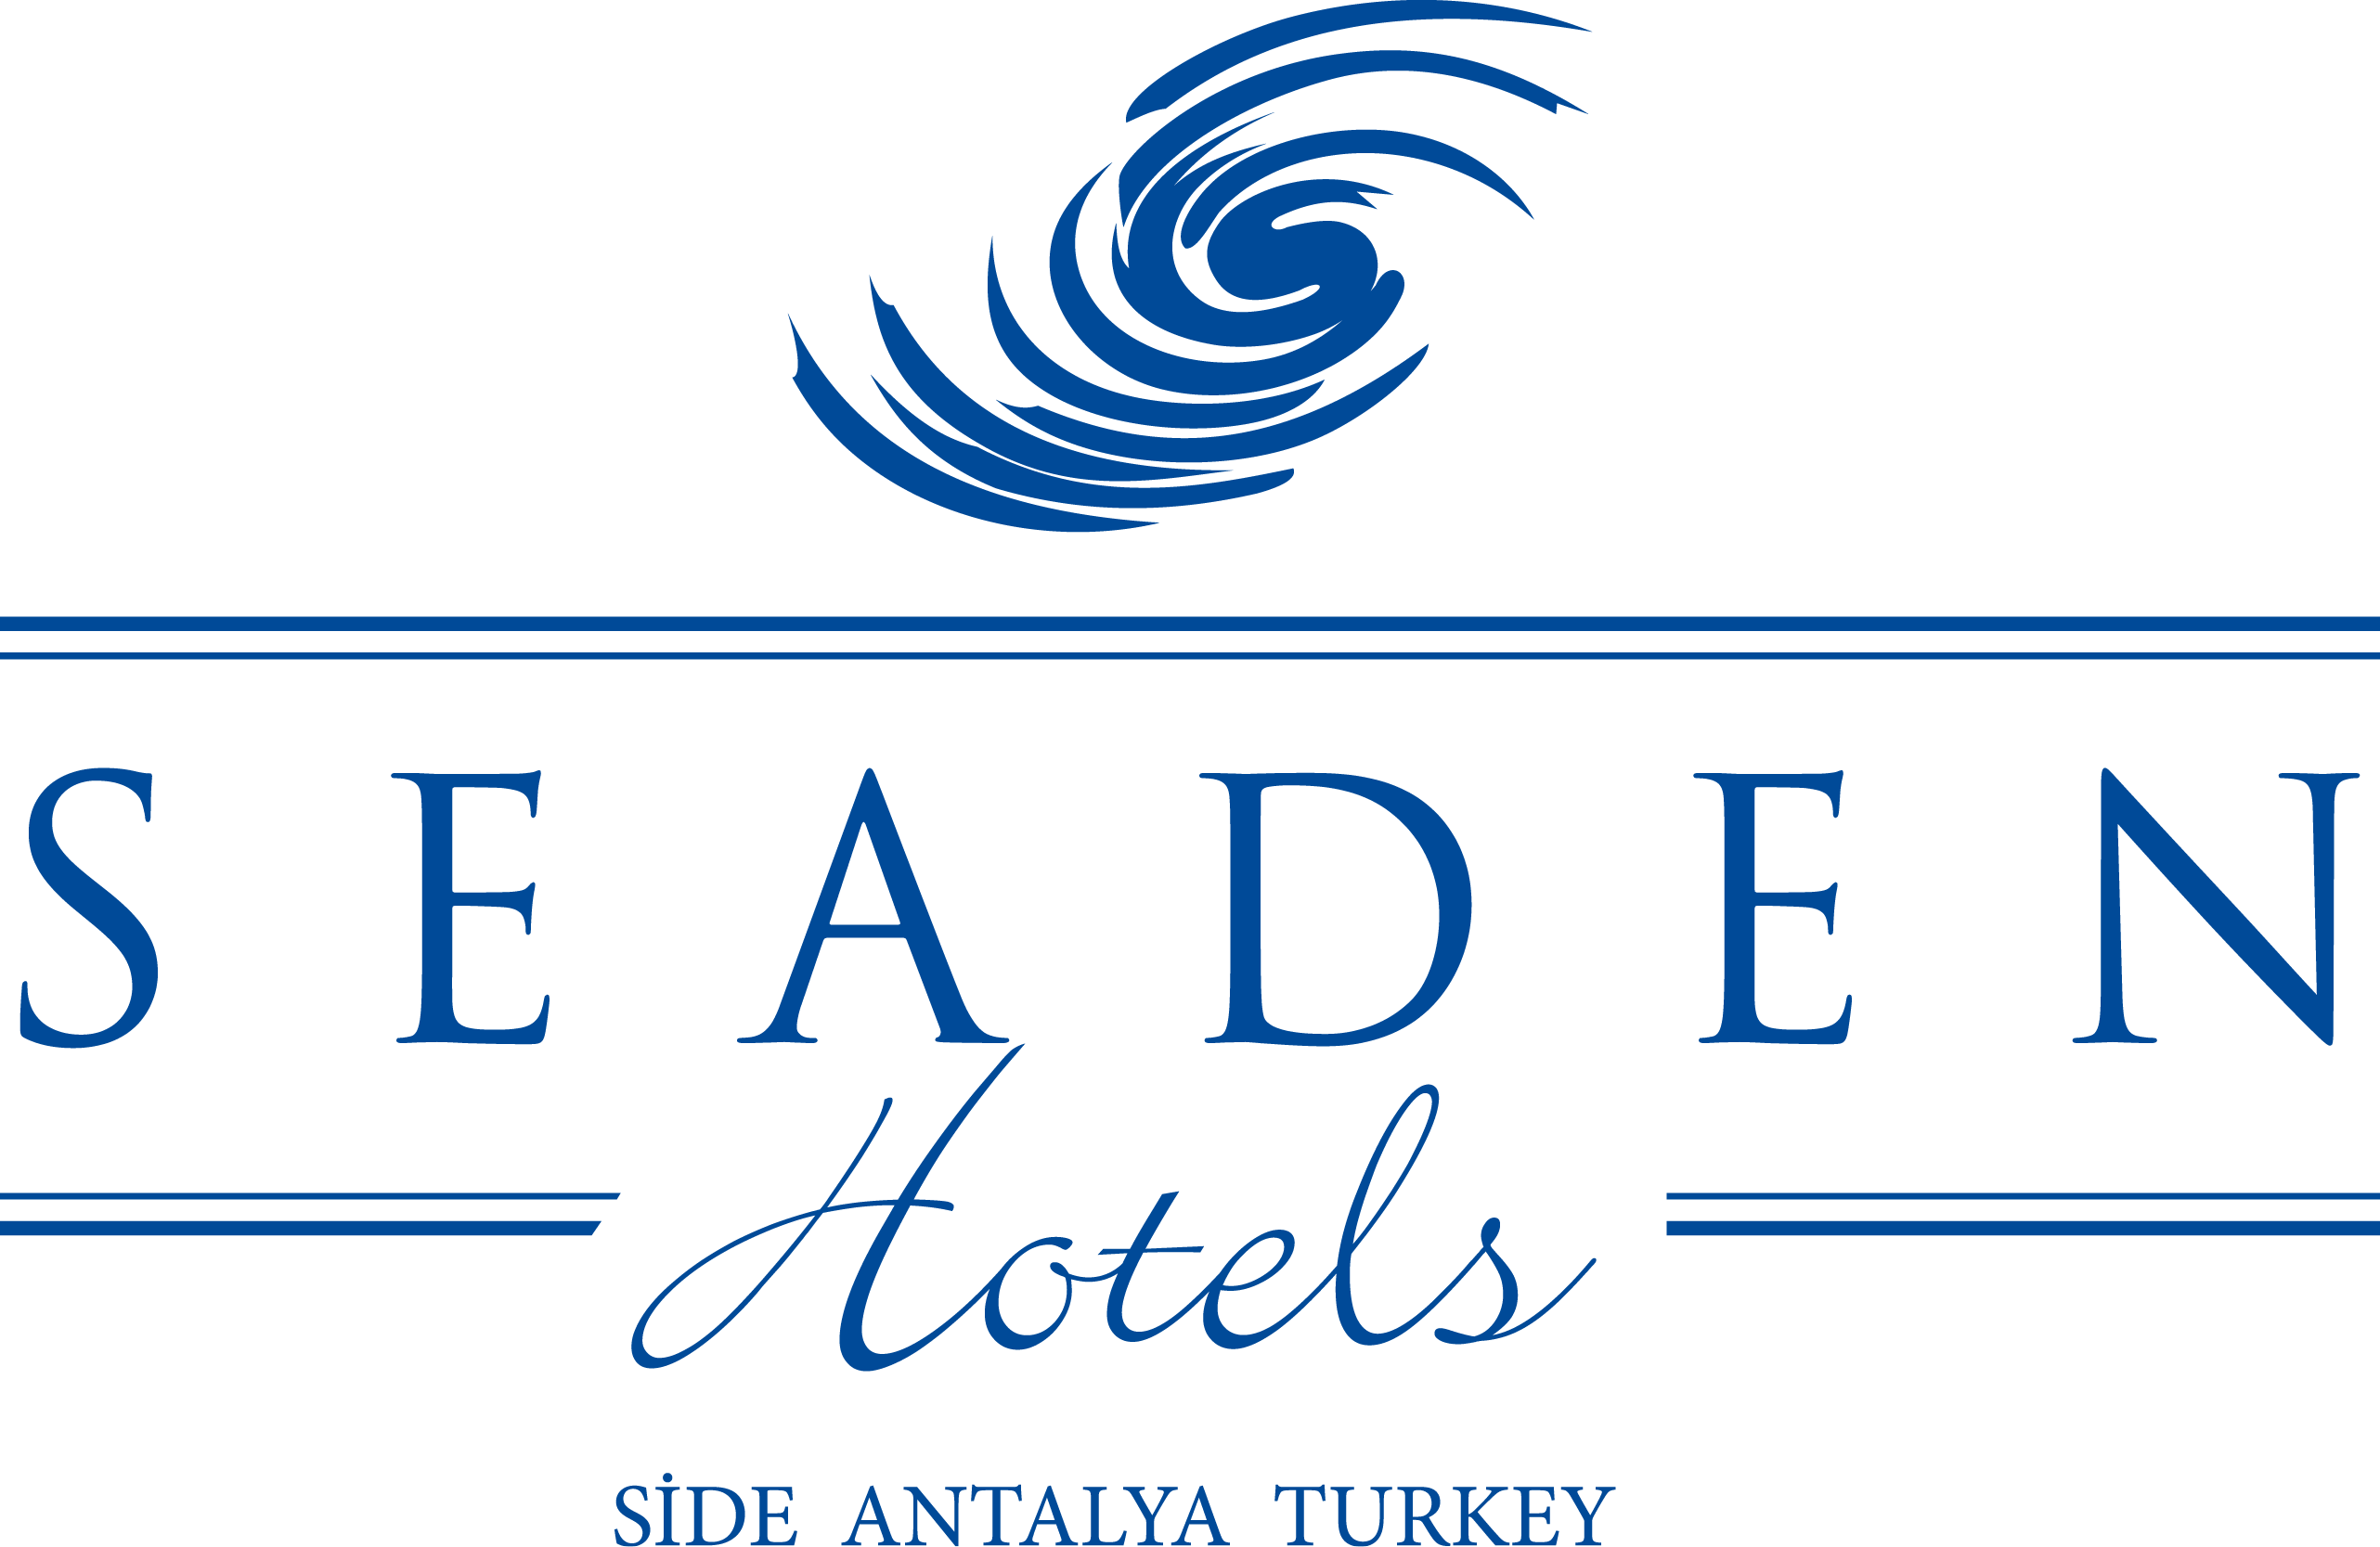 SEADEN HOTELS: THE MYSTERY OF THE BLUE